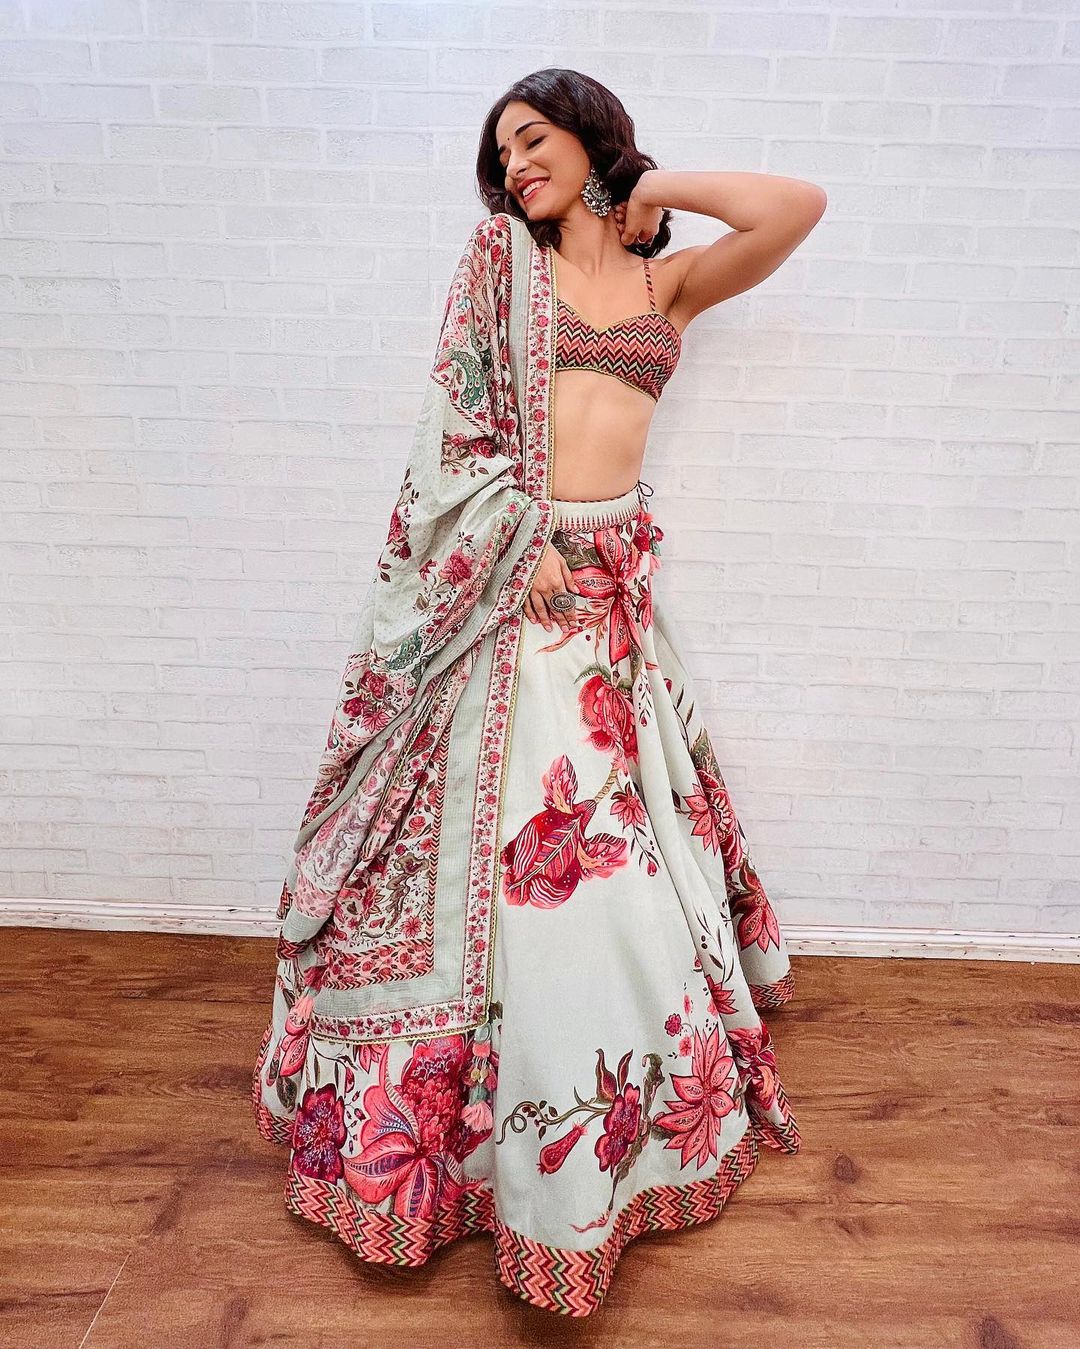 Ananya Panday is a vision to behold in a vibrant floral-printed lehenga